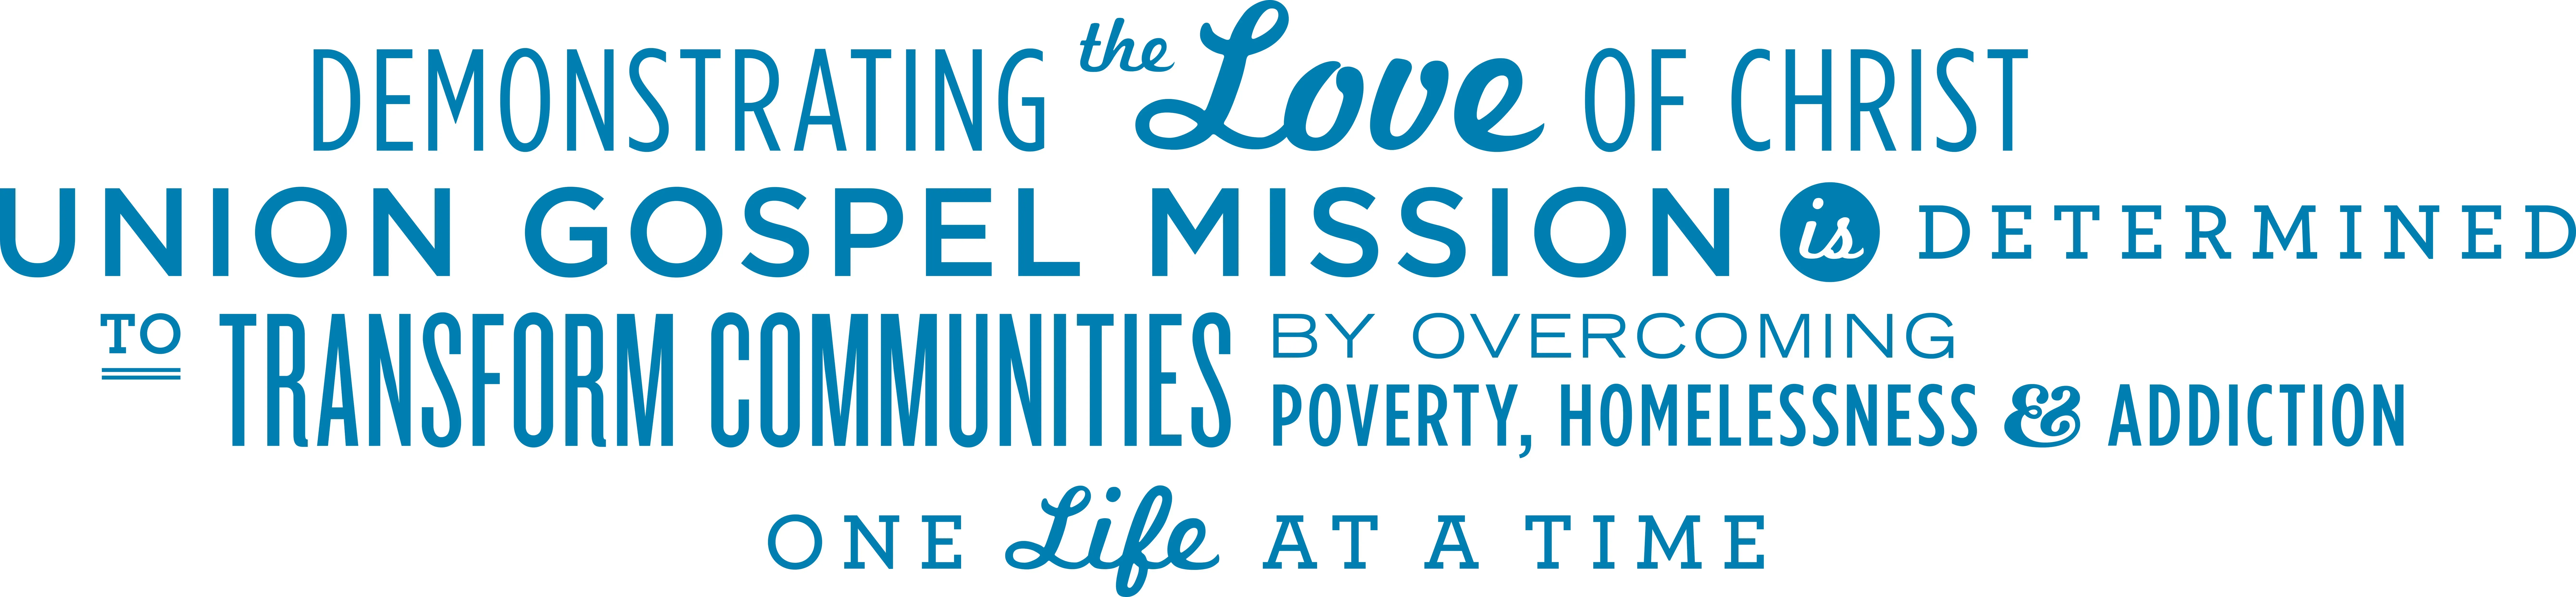 Demonstrating the love of Christ, Union Gospel Mission is determined to transform communities by overcoming poverty, homelessness and addiction one life at a time.